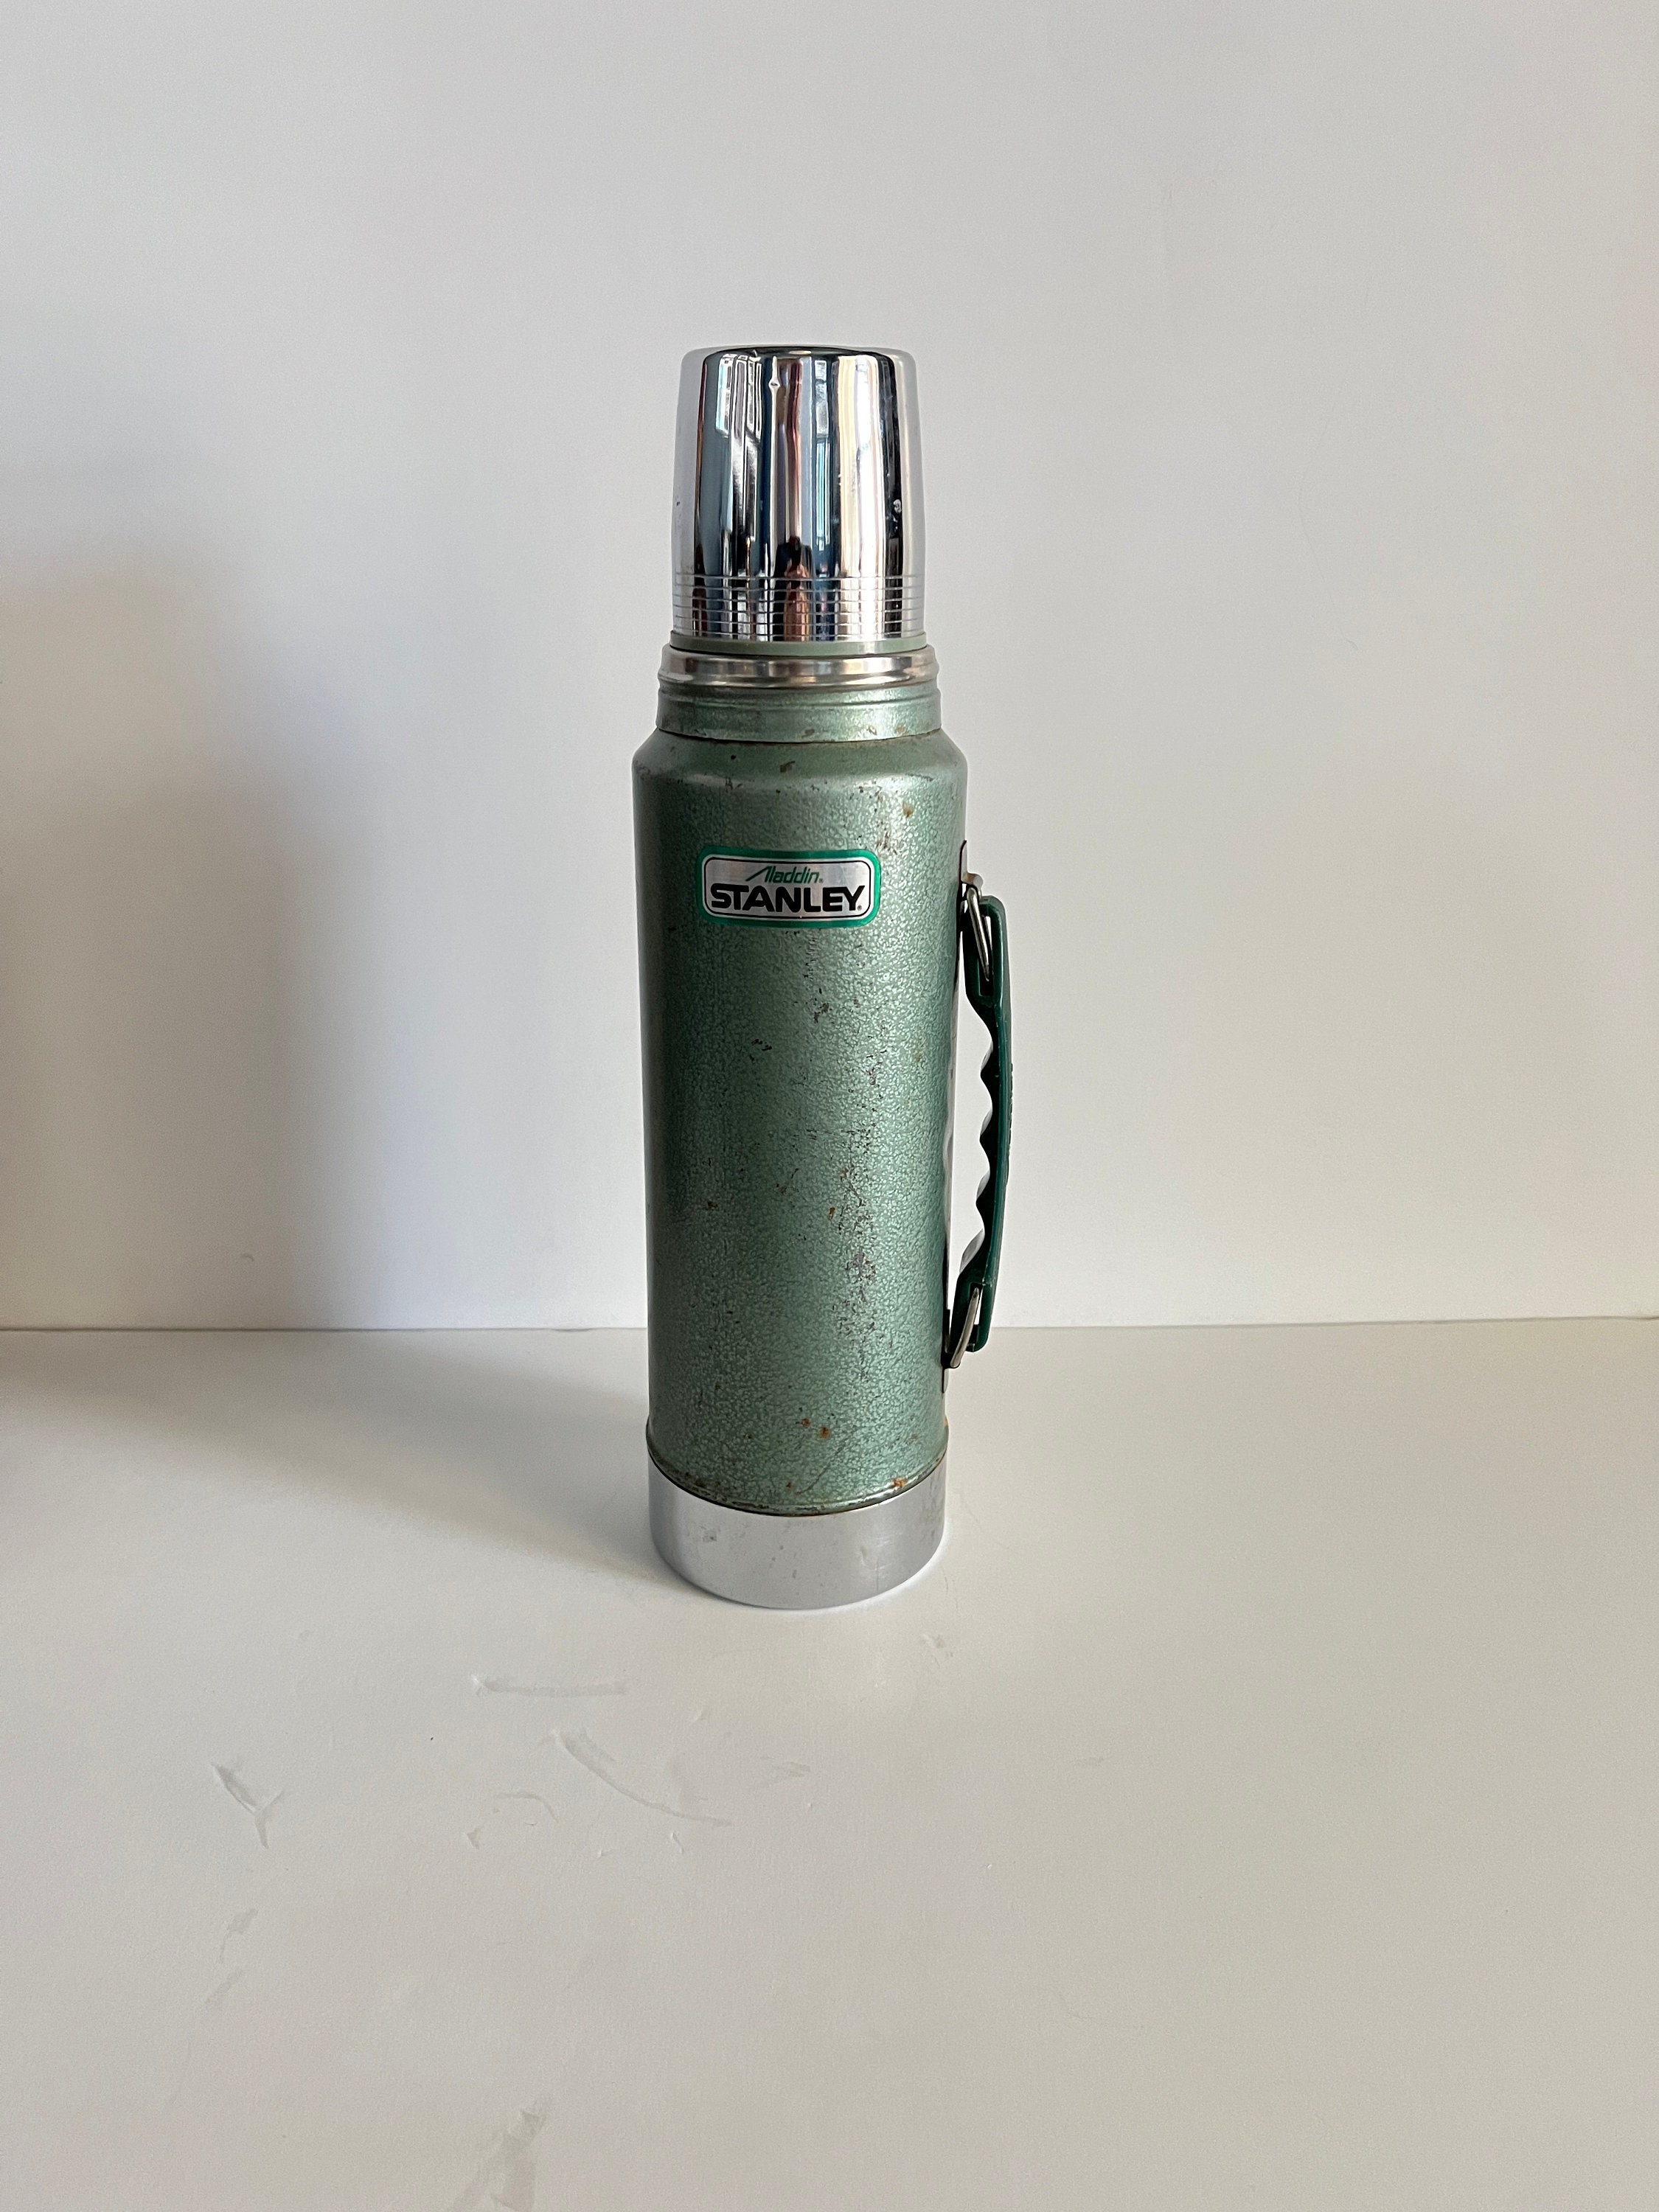 Old Thermos - what's it worth? : r/BuyItForLife